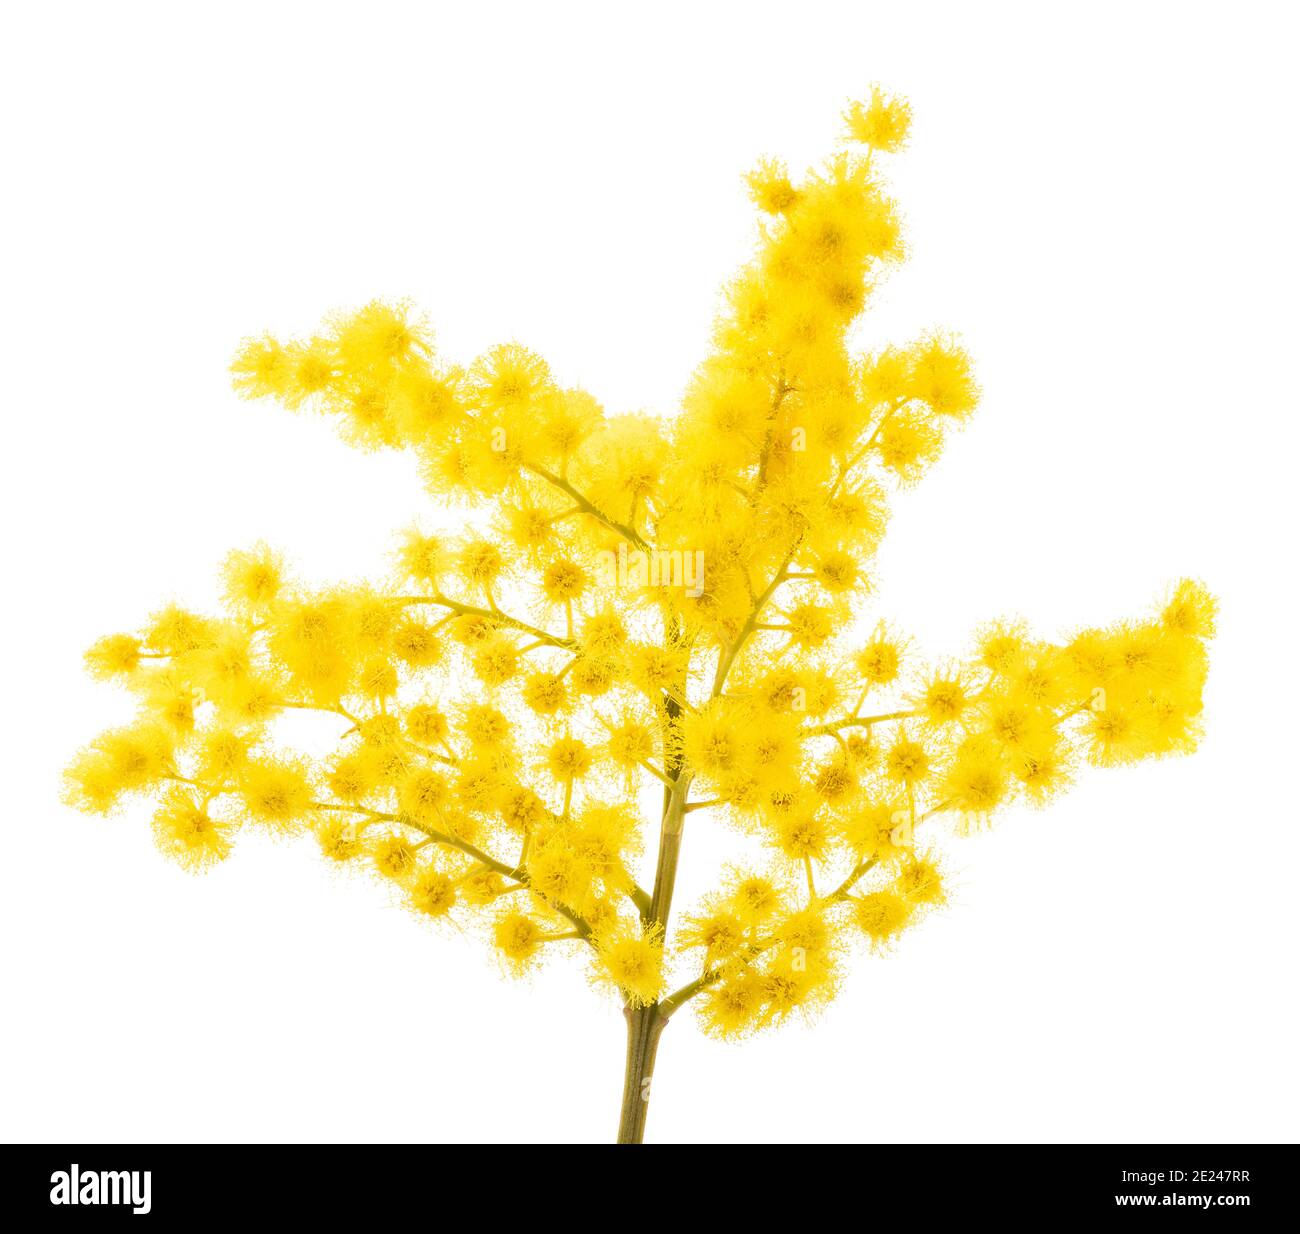 Mimosa (silver wattle) sprig isolated on white background. Stock Photo